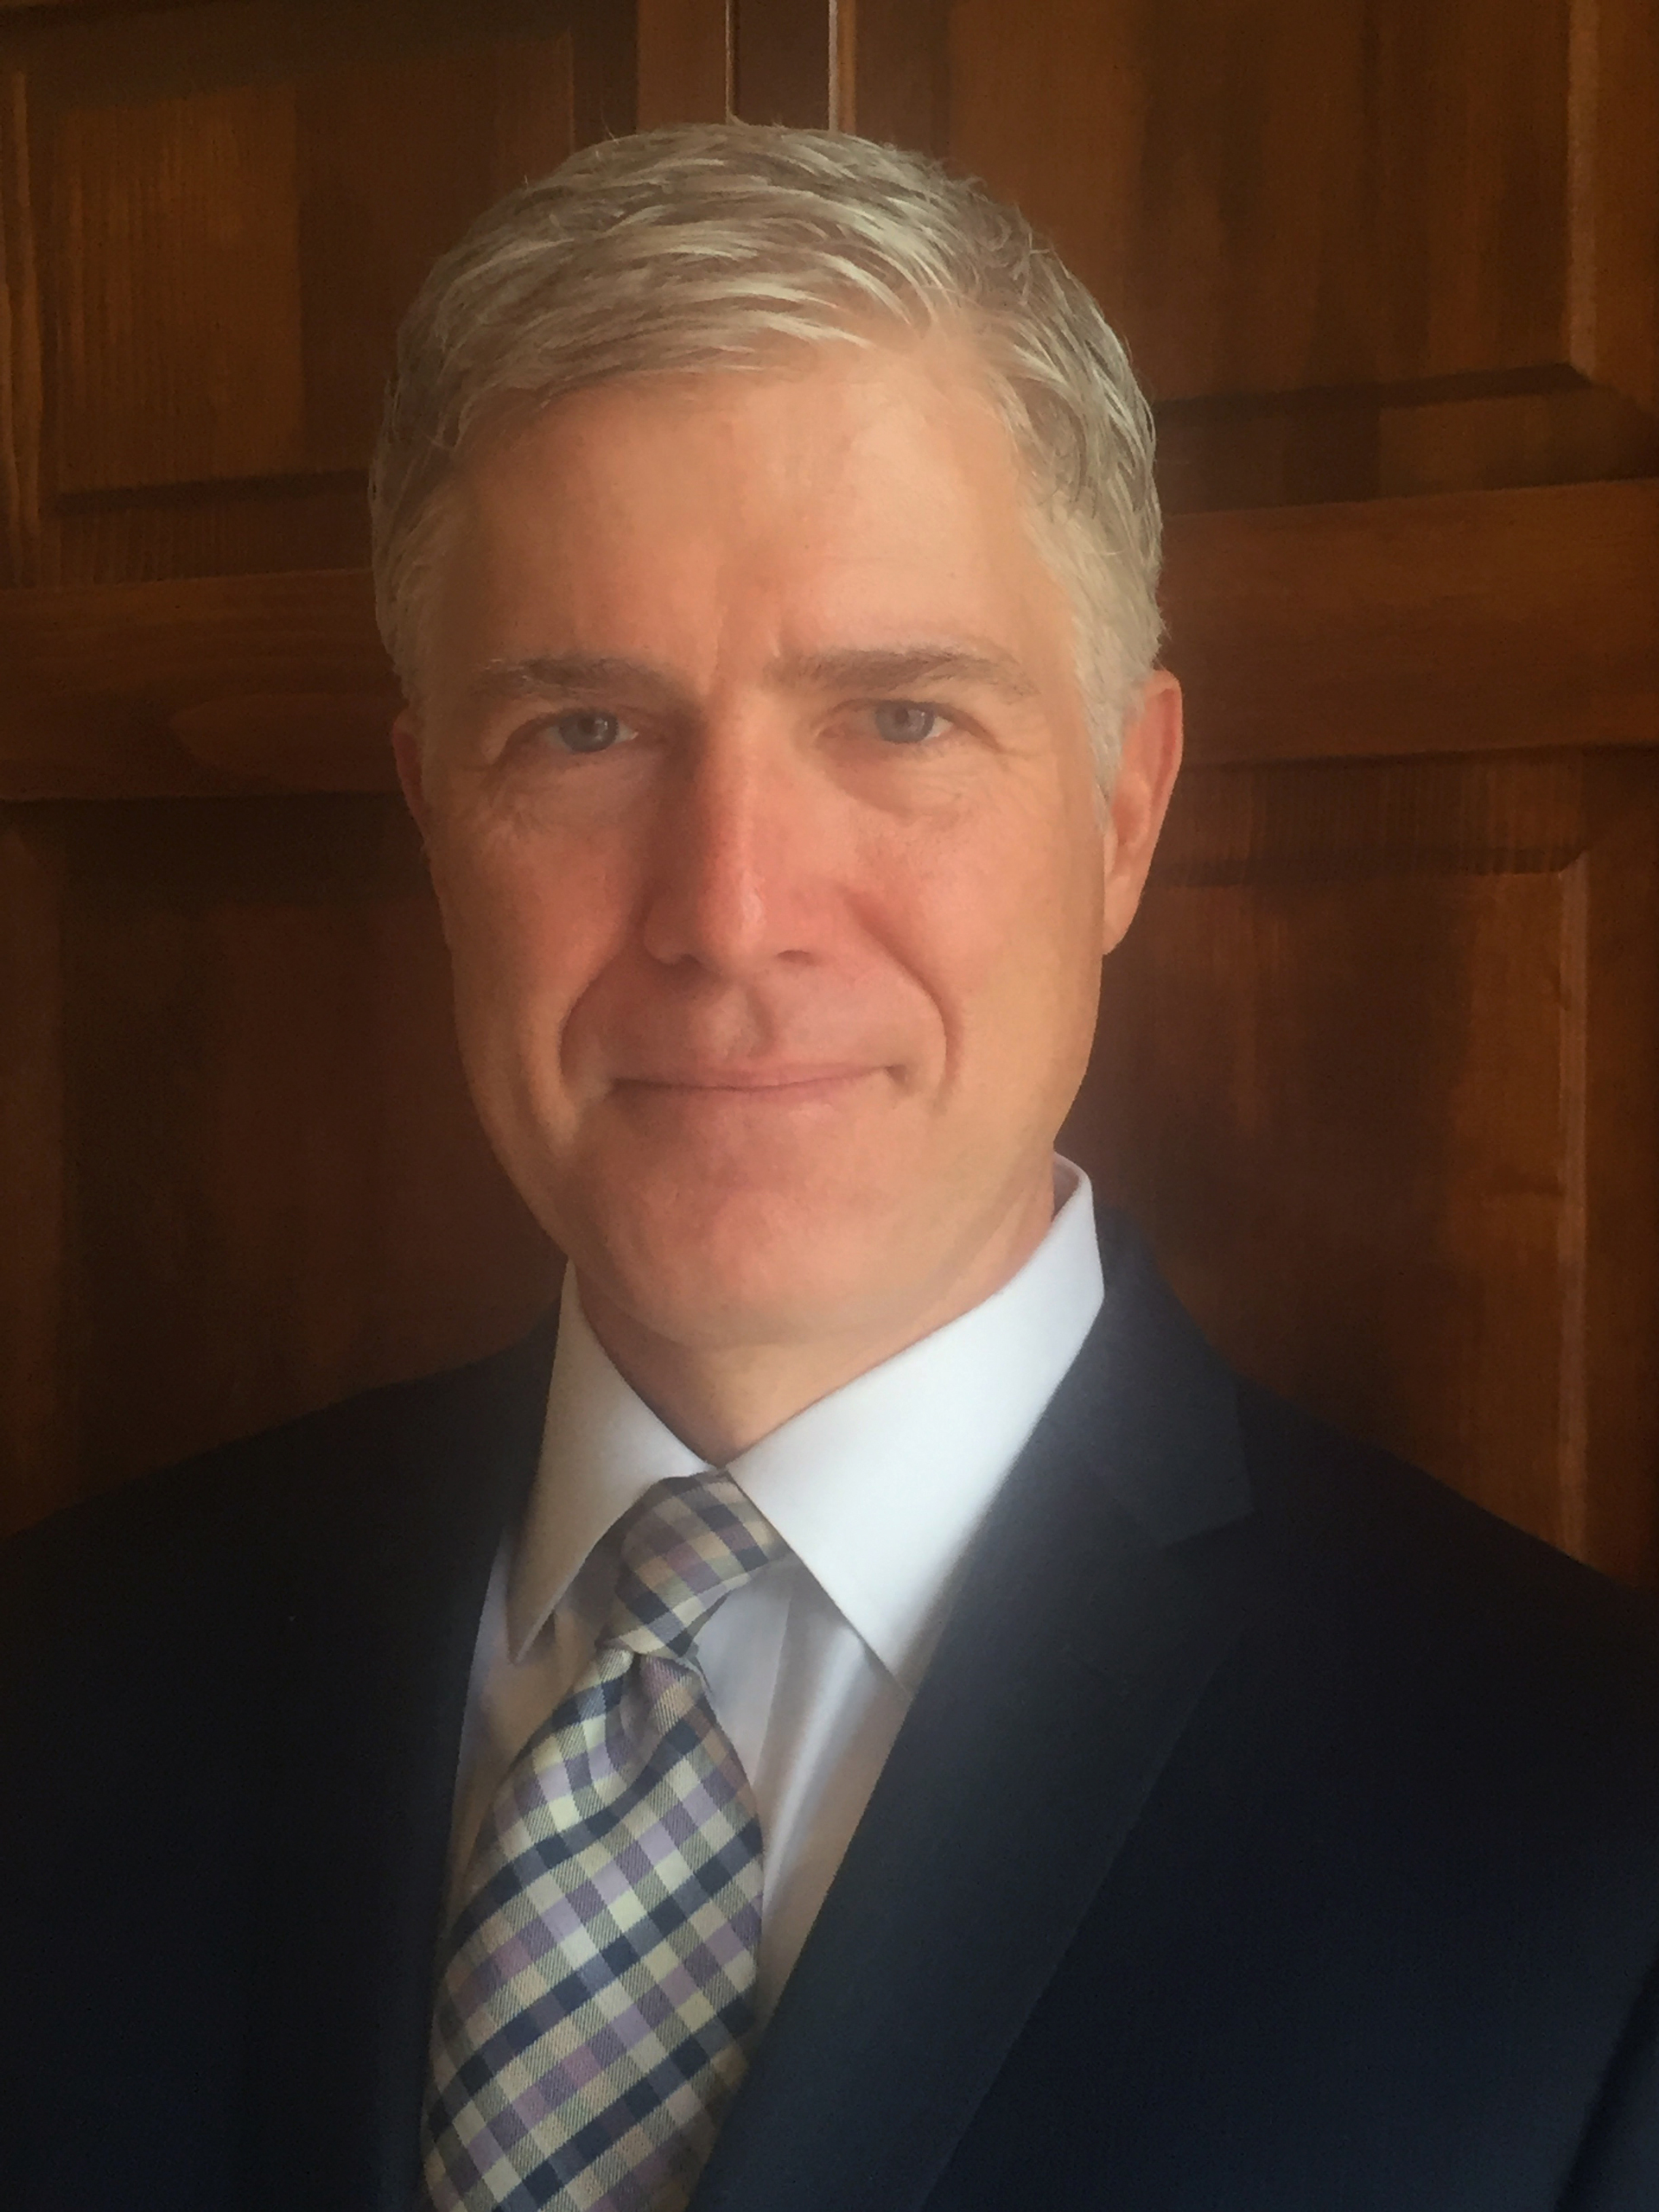 Judge Neil Gorsuch, in an undated photo provided by the 10th U.S. Circuit Court of Appeals. (10th U.S. Circuit Court of Appeals/AP)